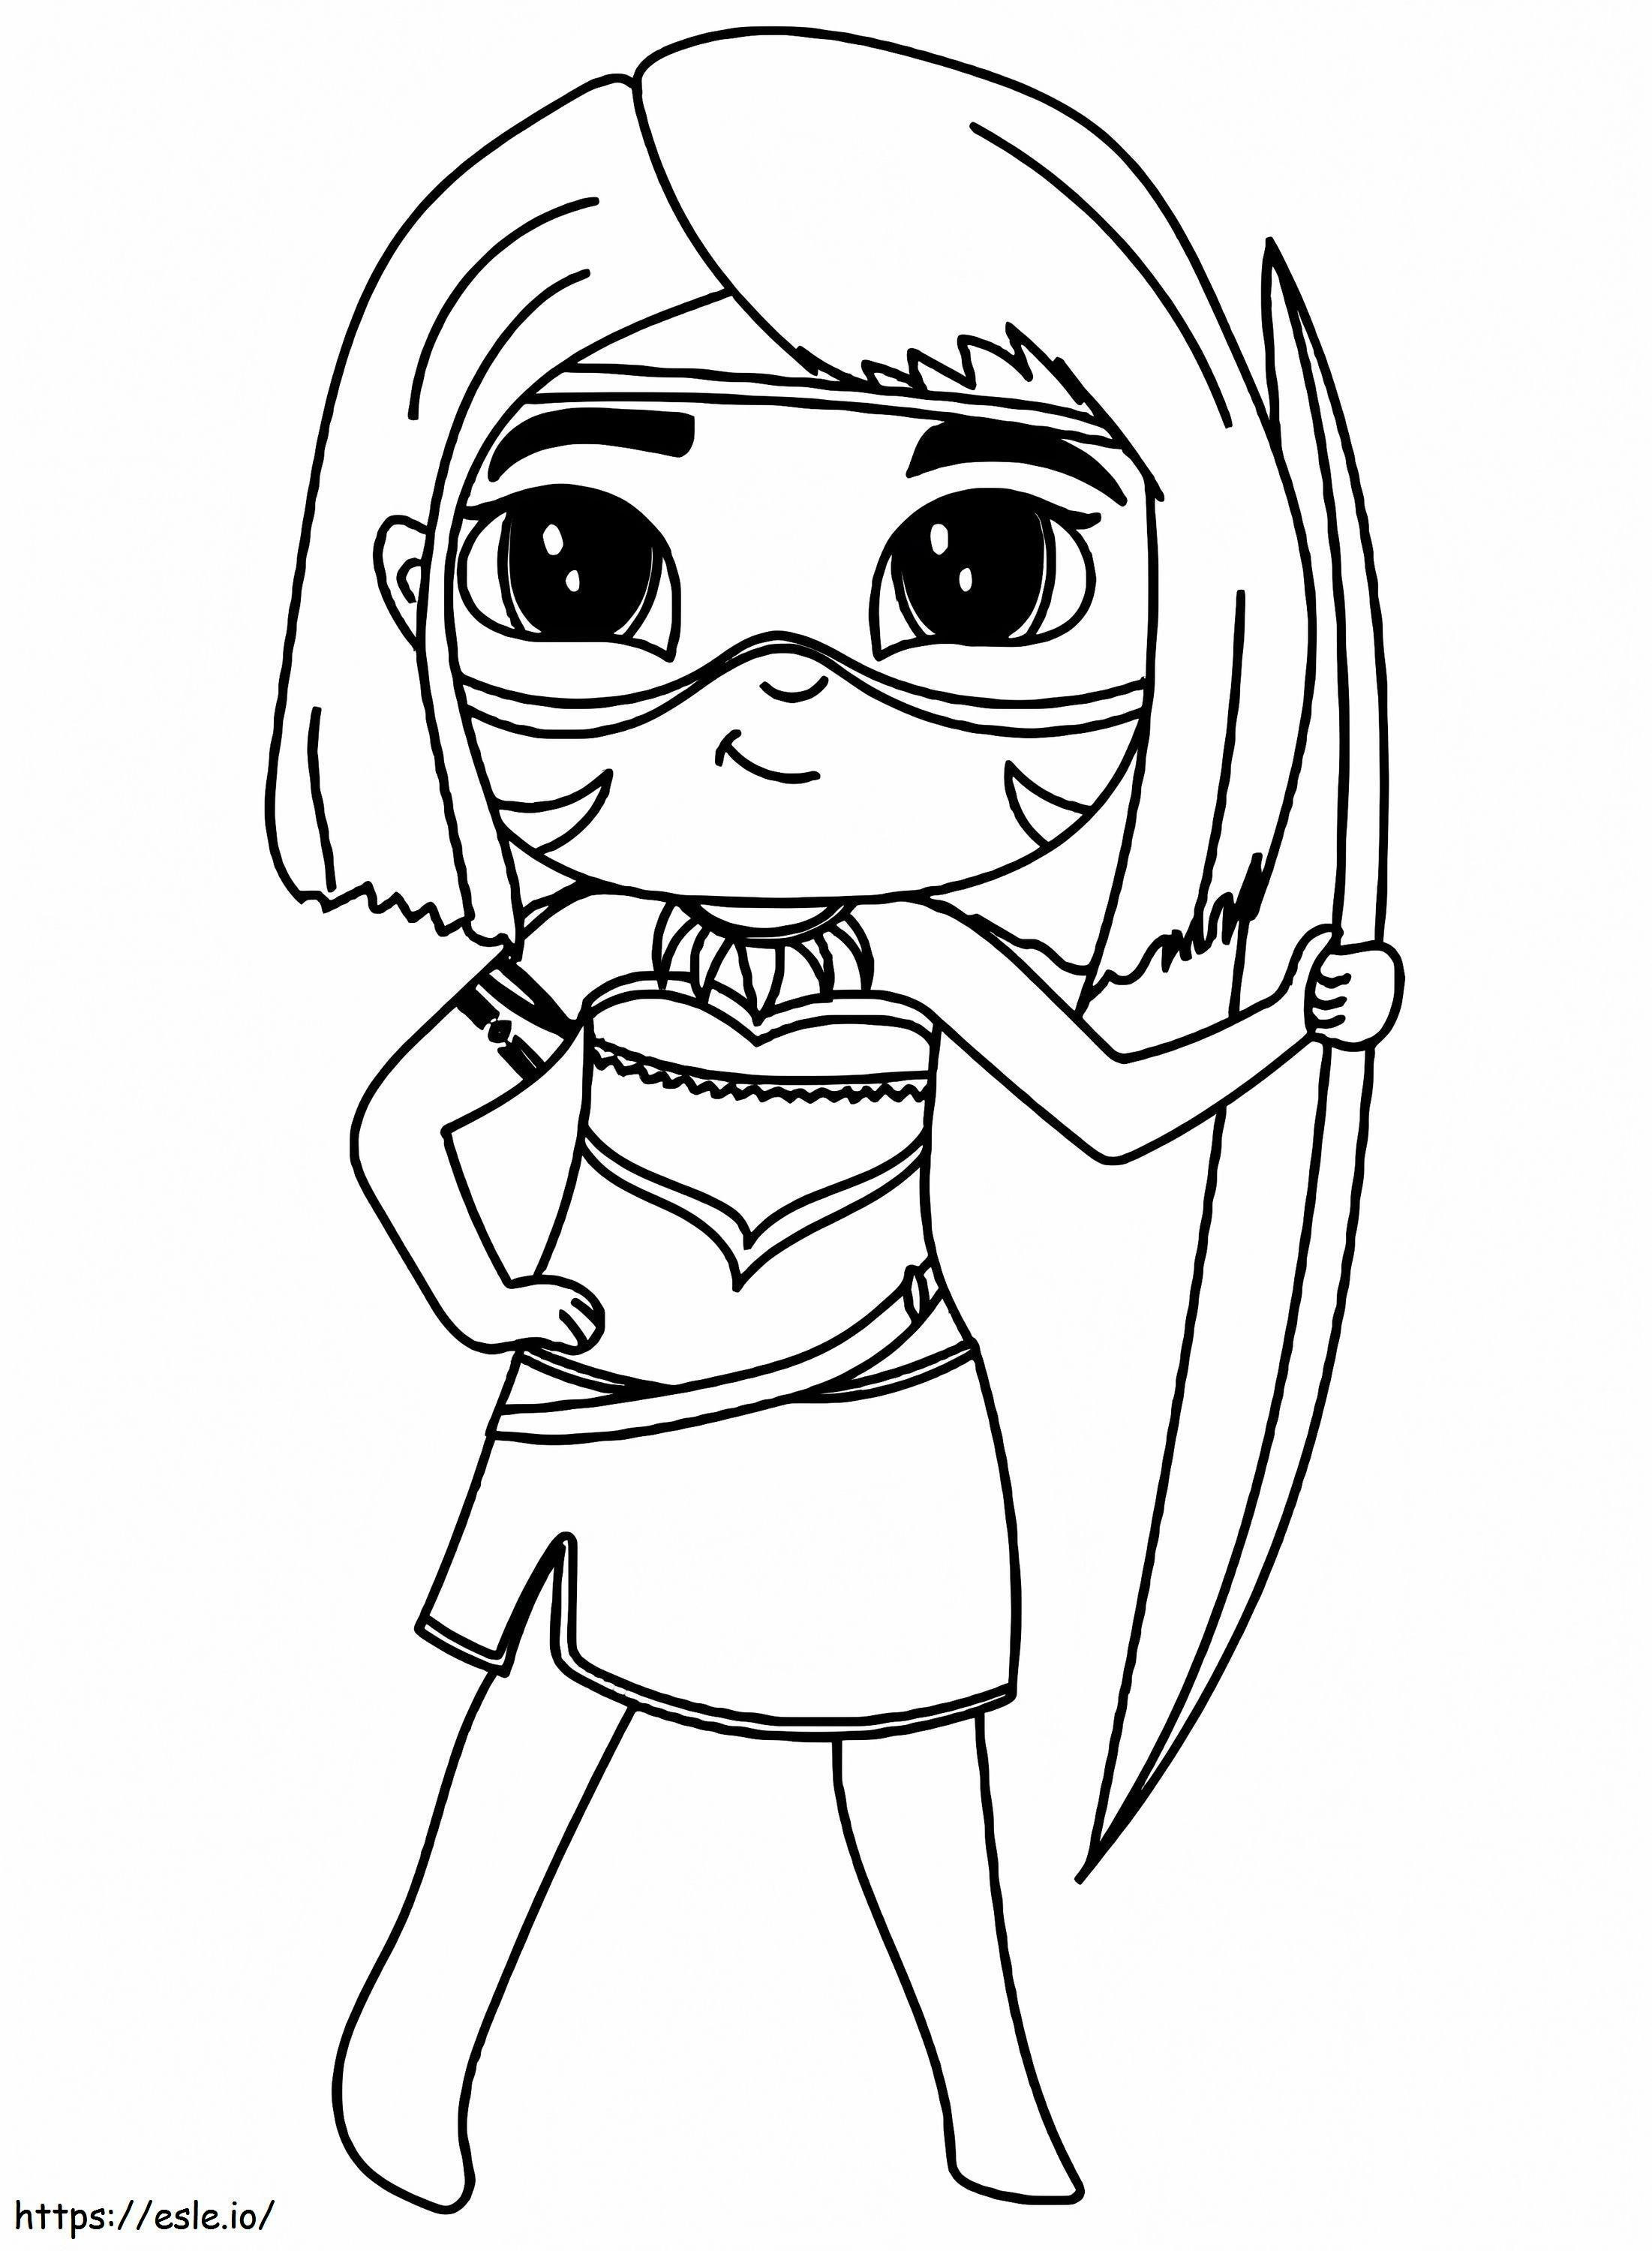 Cute Ainbo coloring page